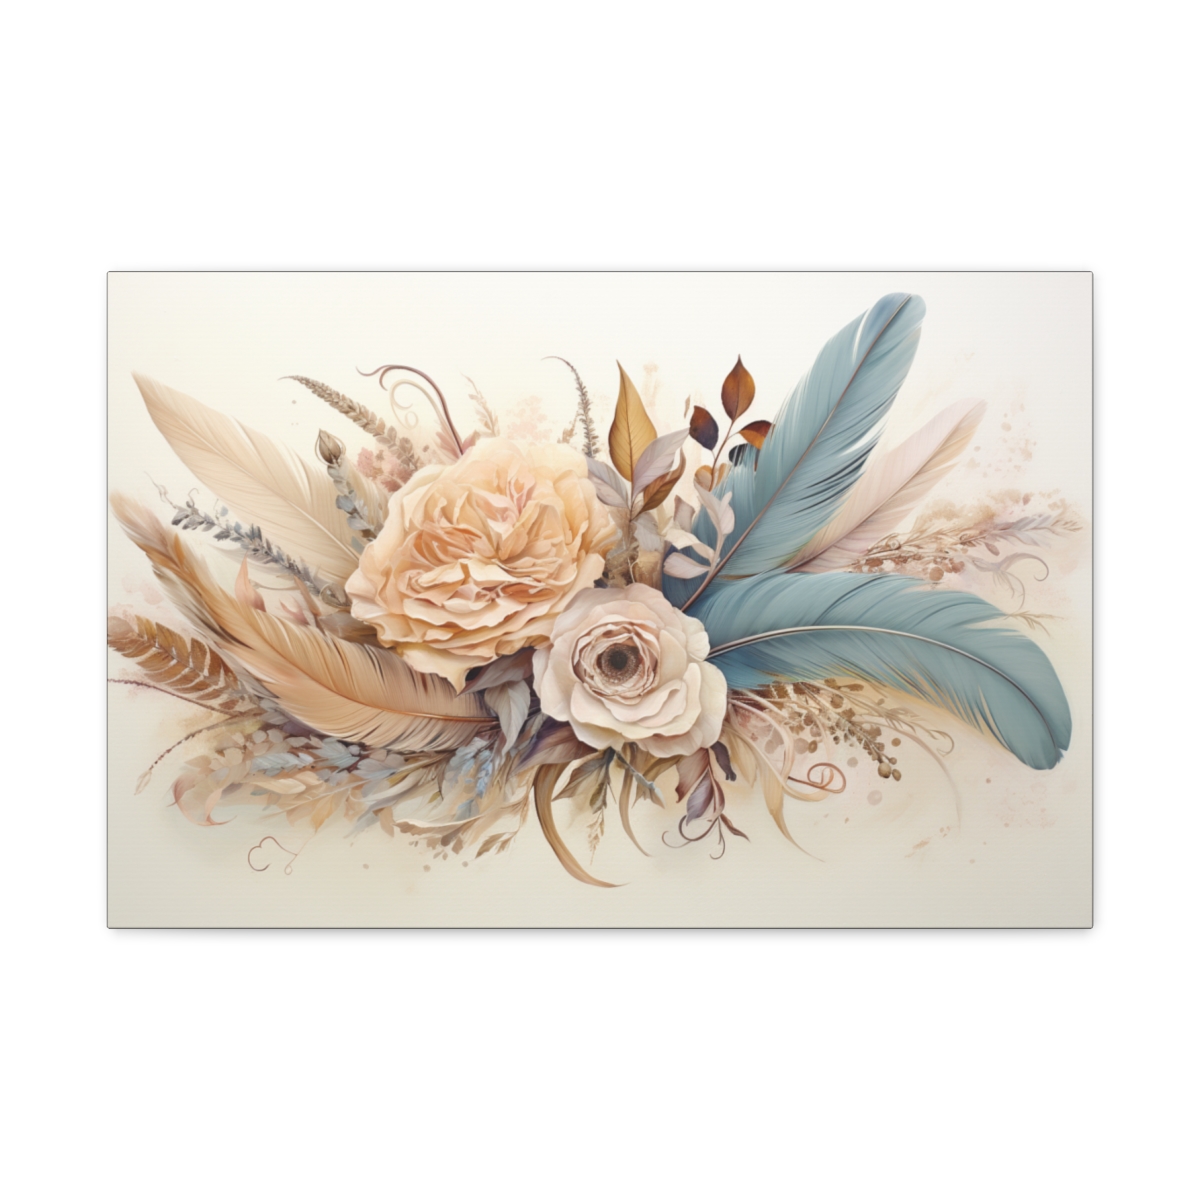 Flower Art Canvas Print: The Muse